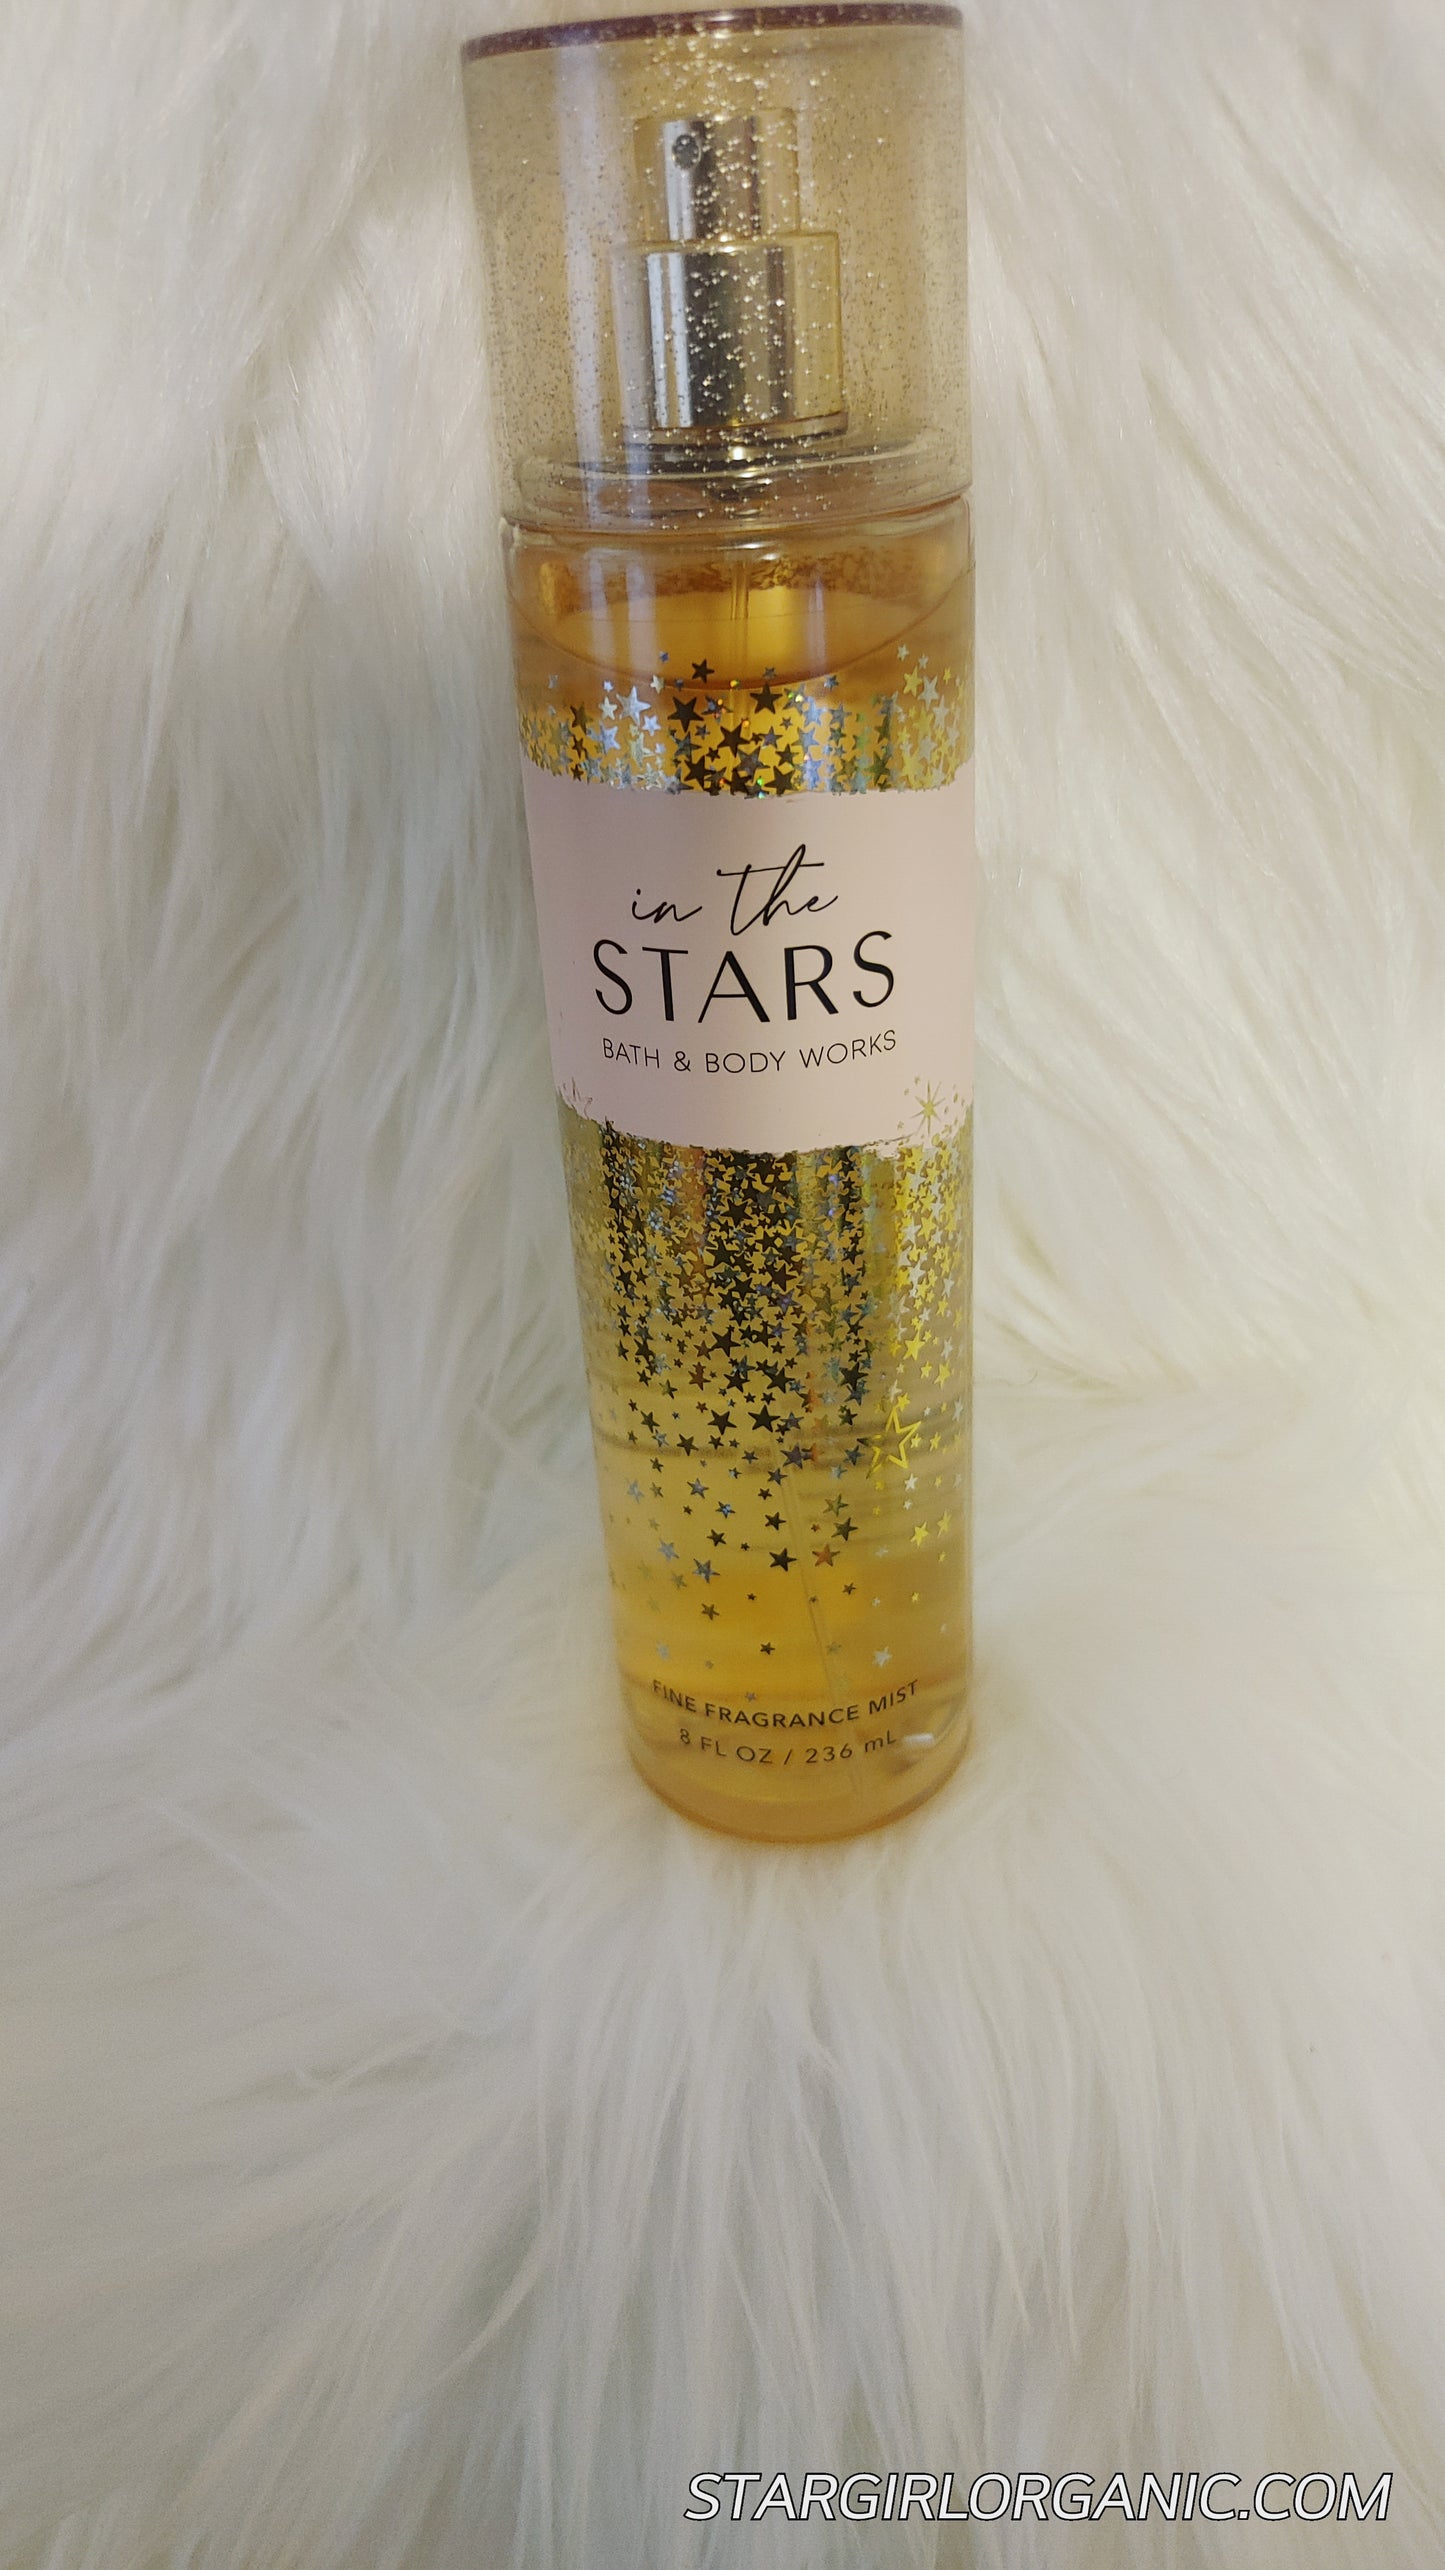 Bath & Body Works In The Stars Signature Collection Fragrance Mist